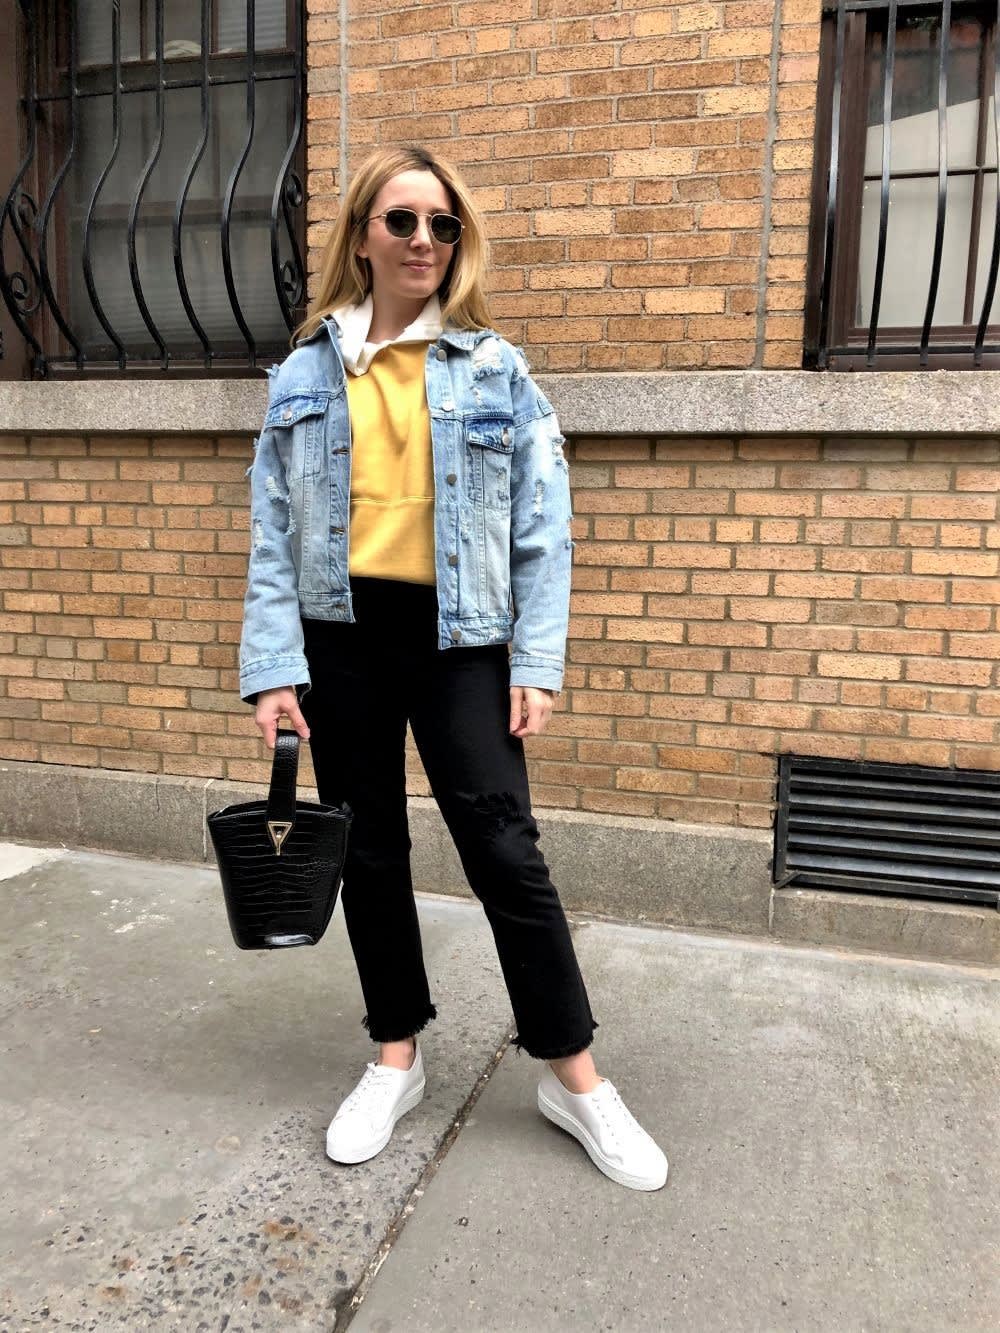 How to style a denim jacket - just in time for spring | HELLO!